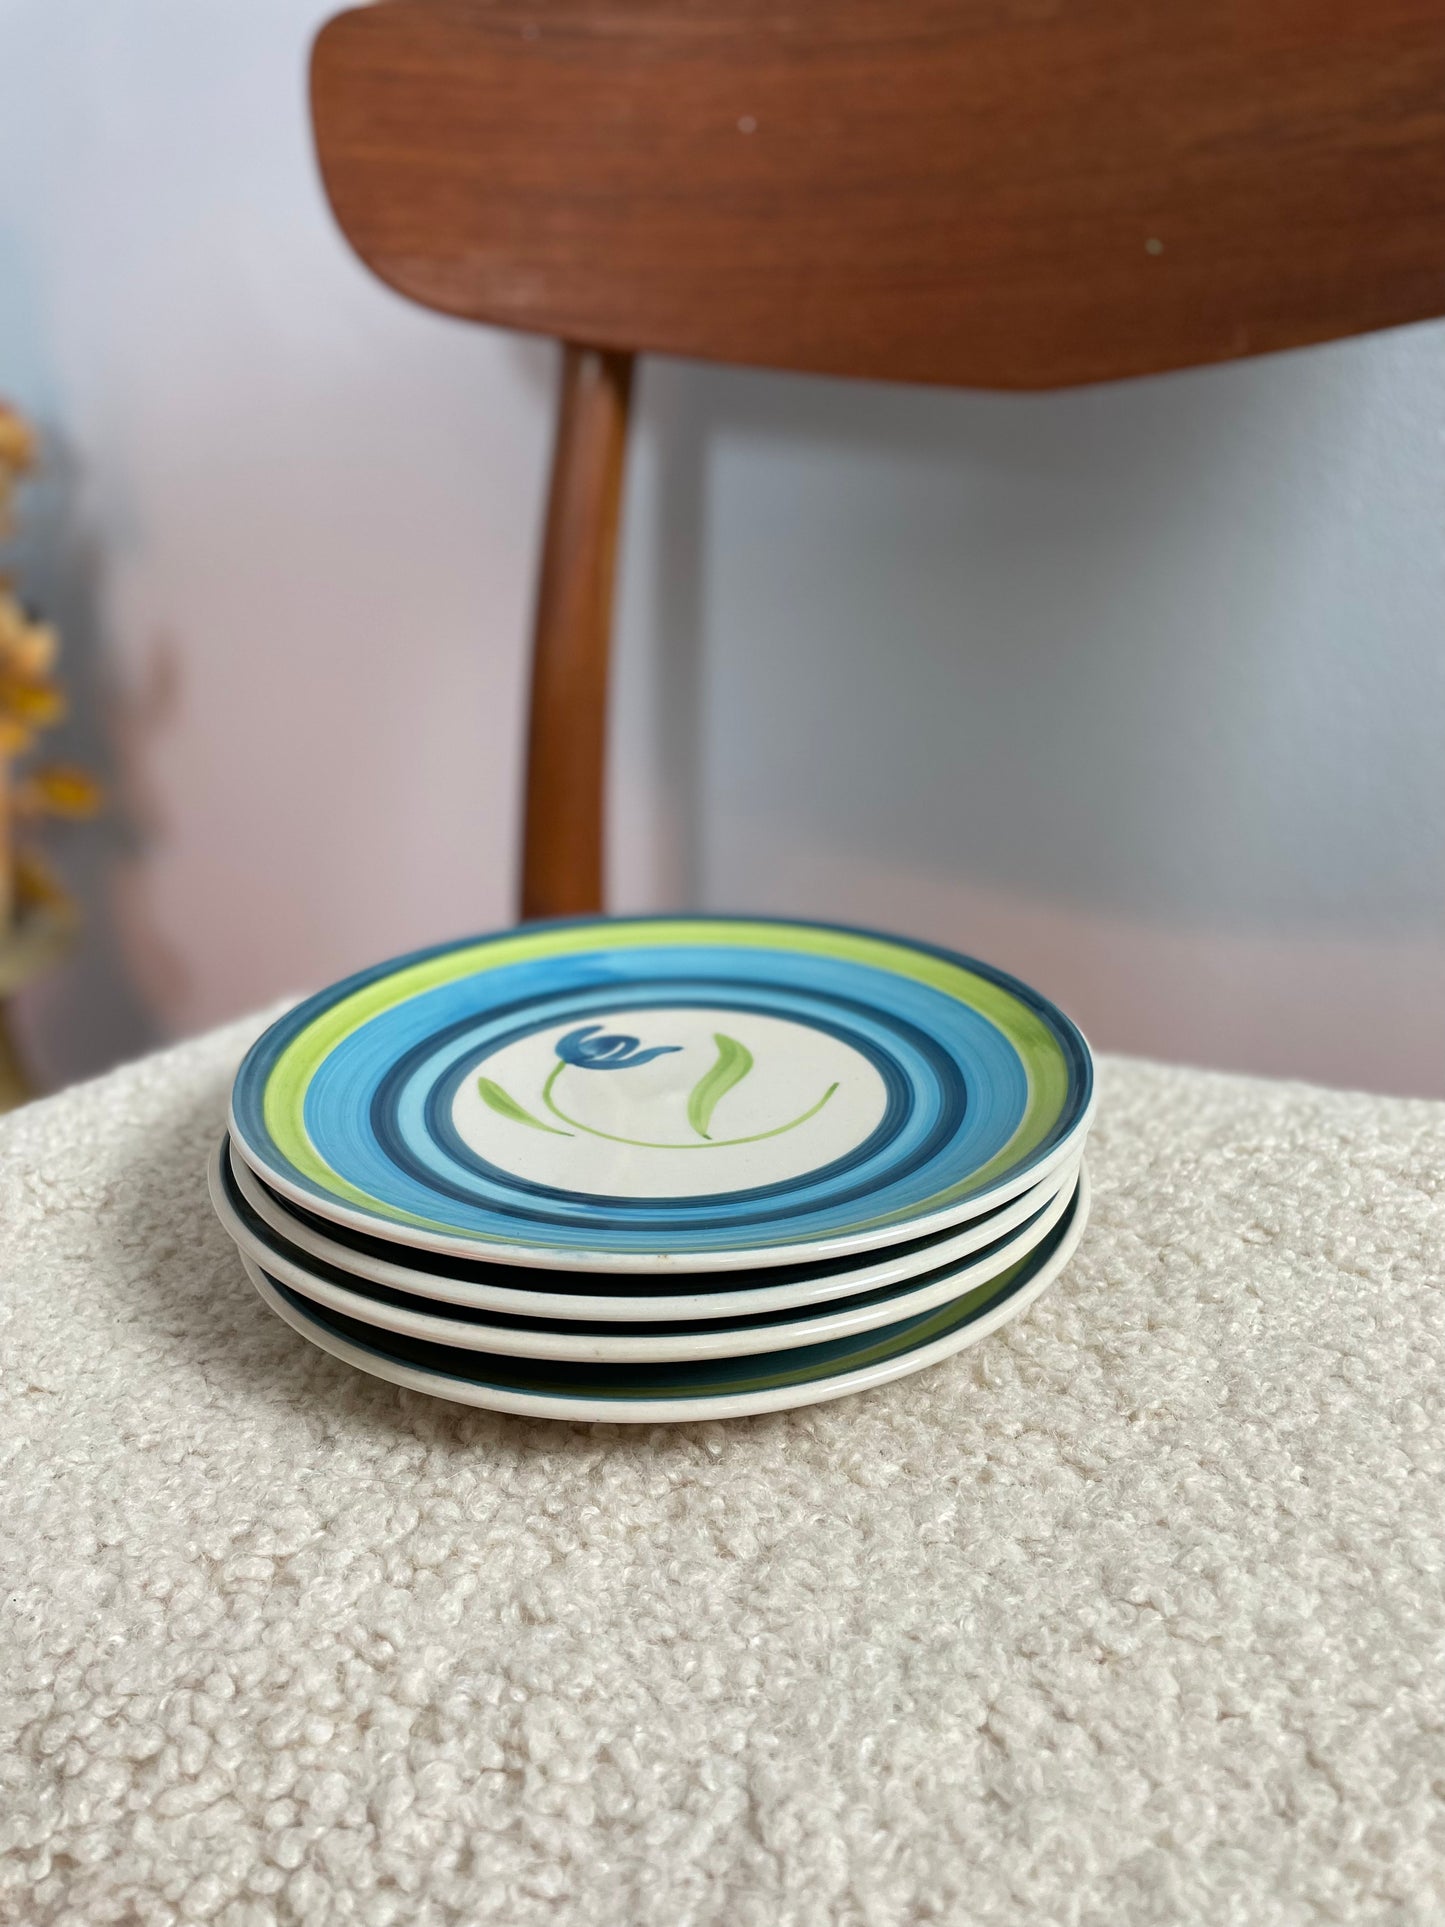 Blue and green breakfast plates with flowers